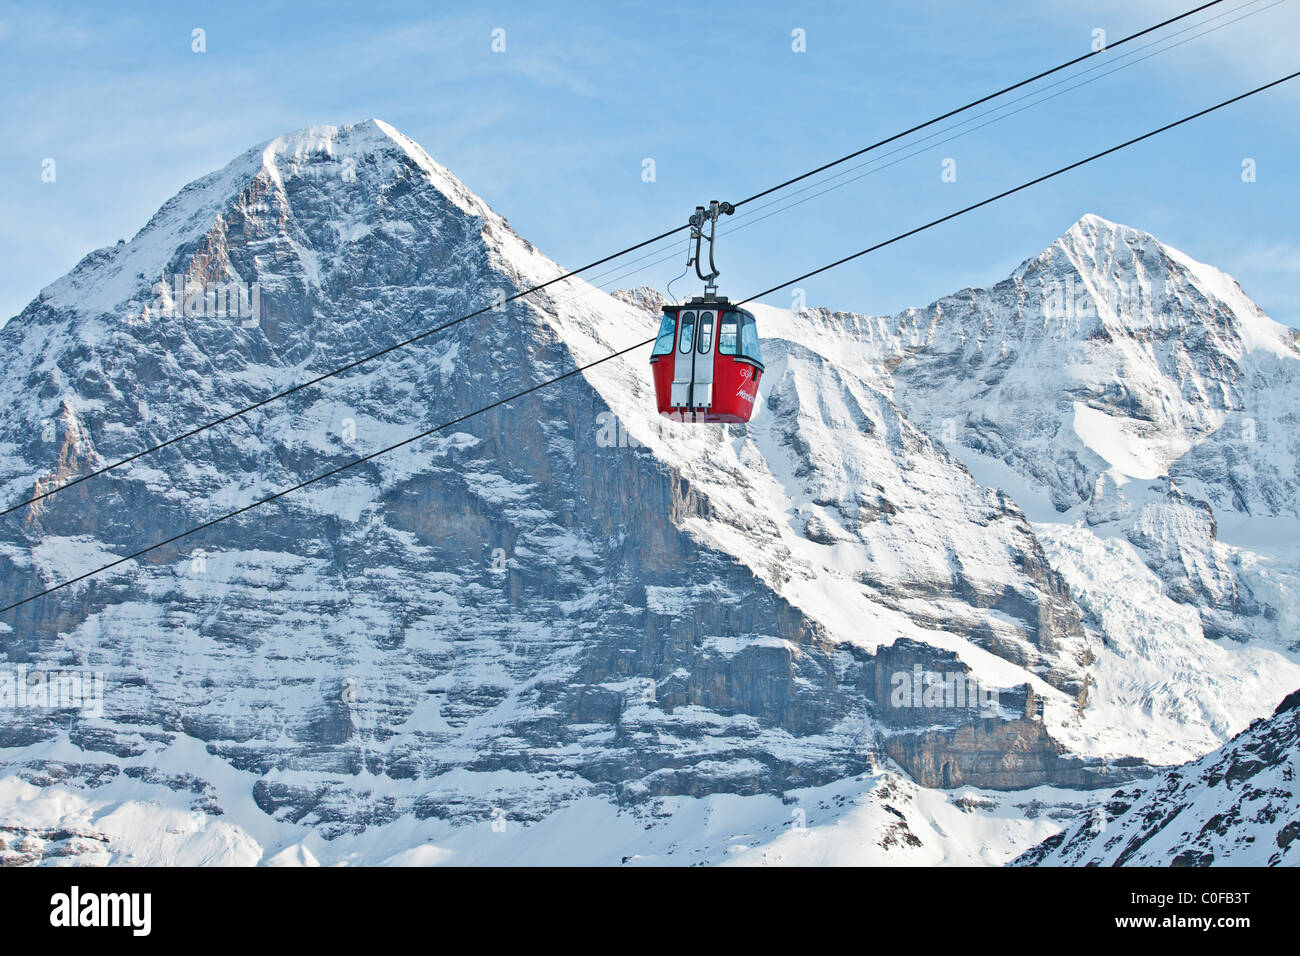 Cabin Ski lift with Mt Eiger on the left side and Mt Monch on the right side, Mannlichen, Grindelwald, Switzerland Stock Photo